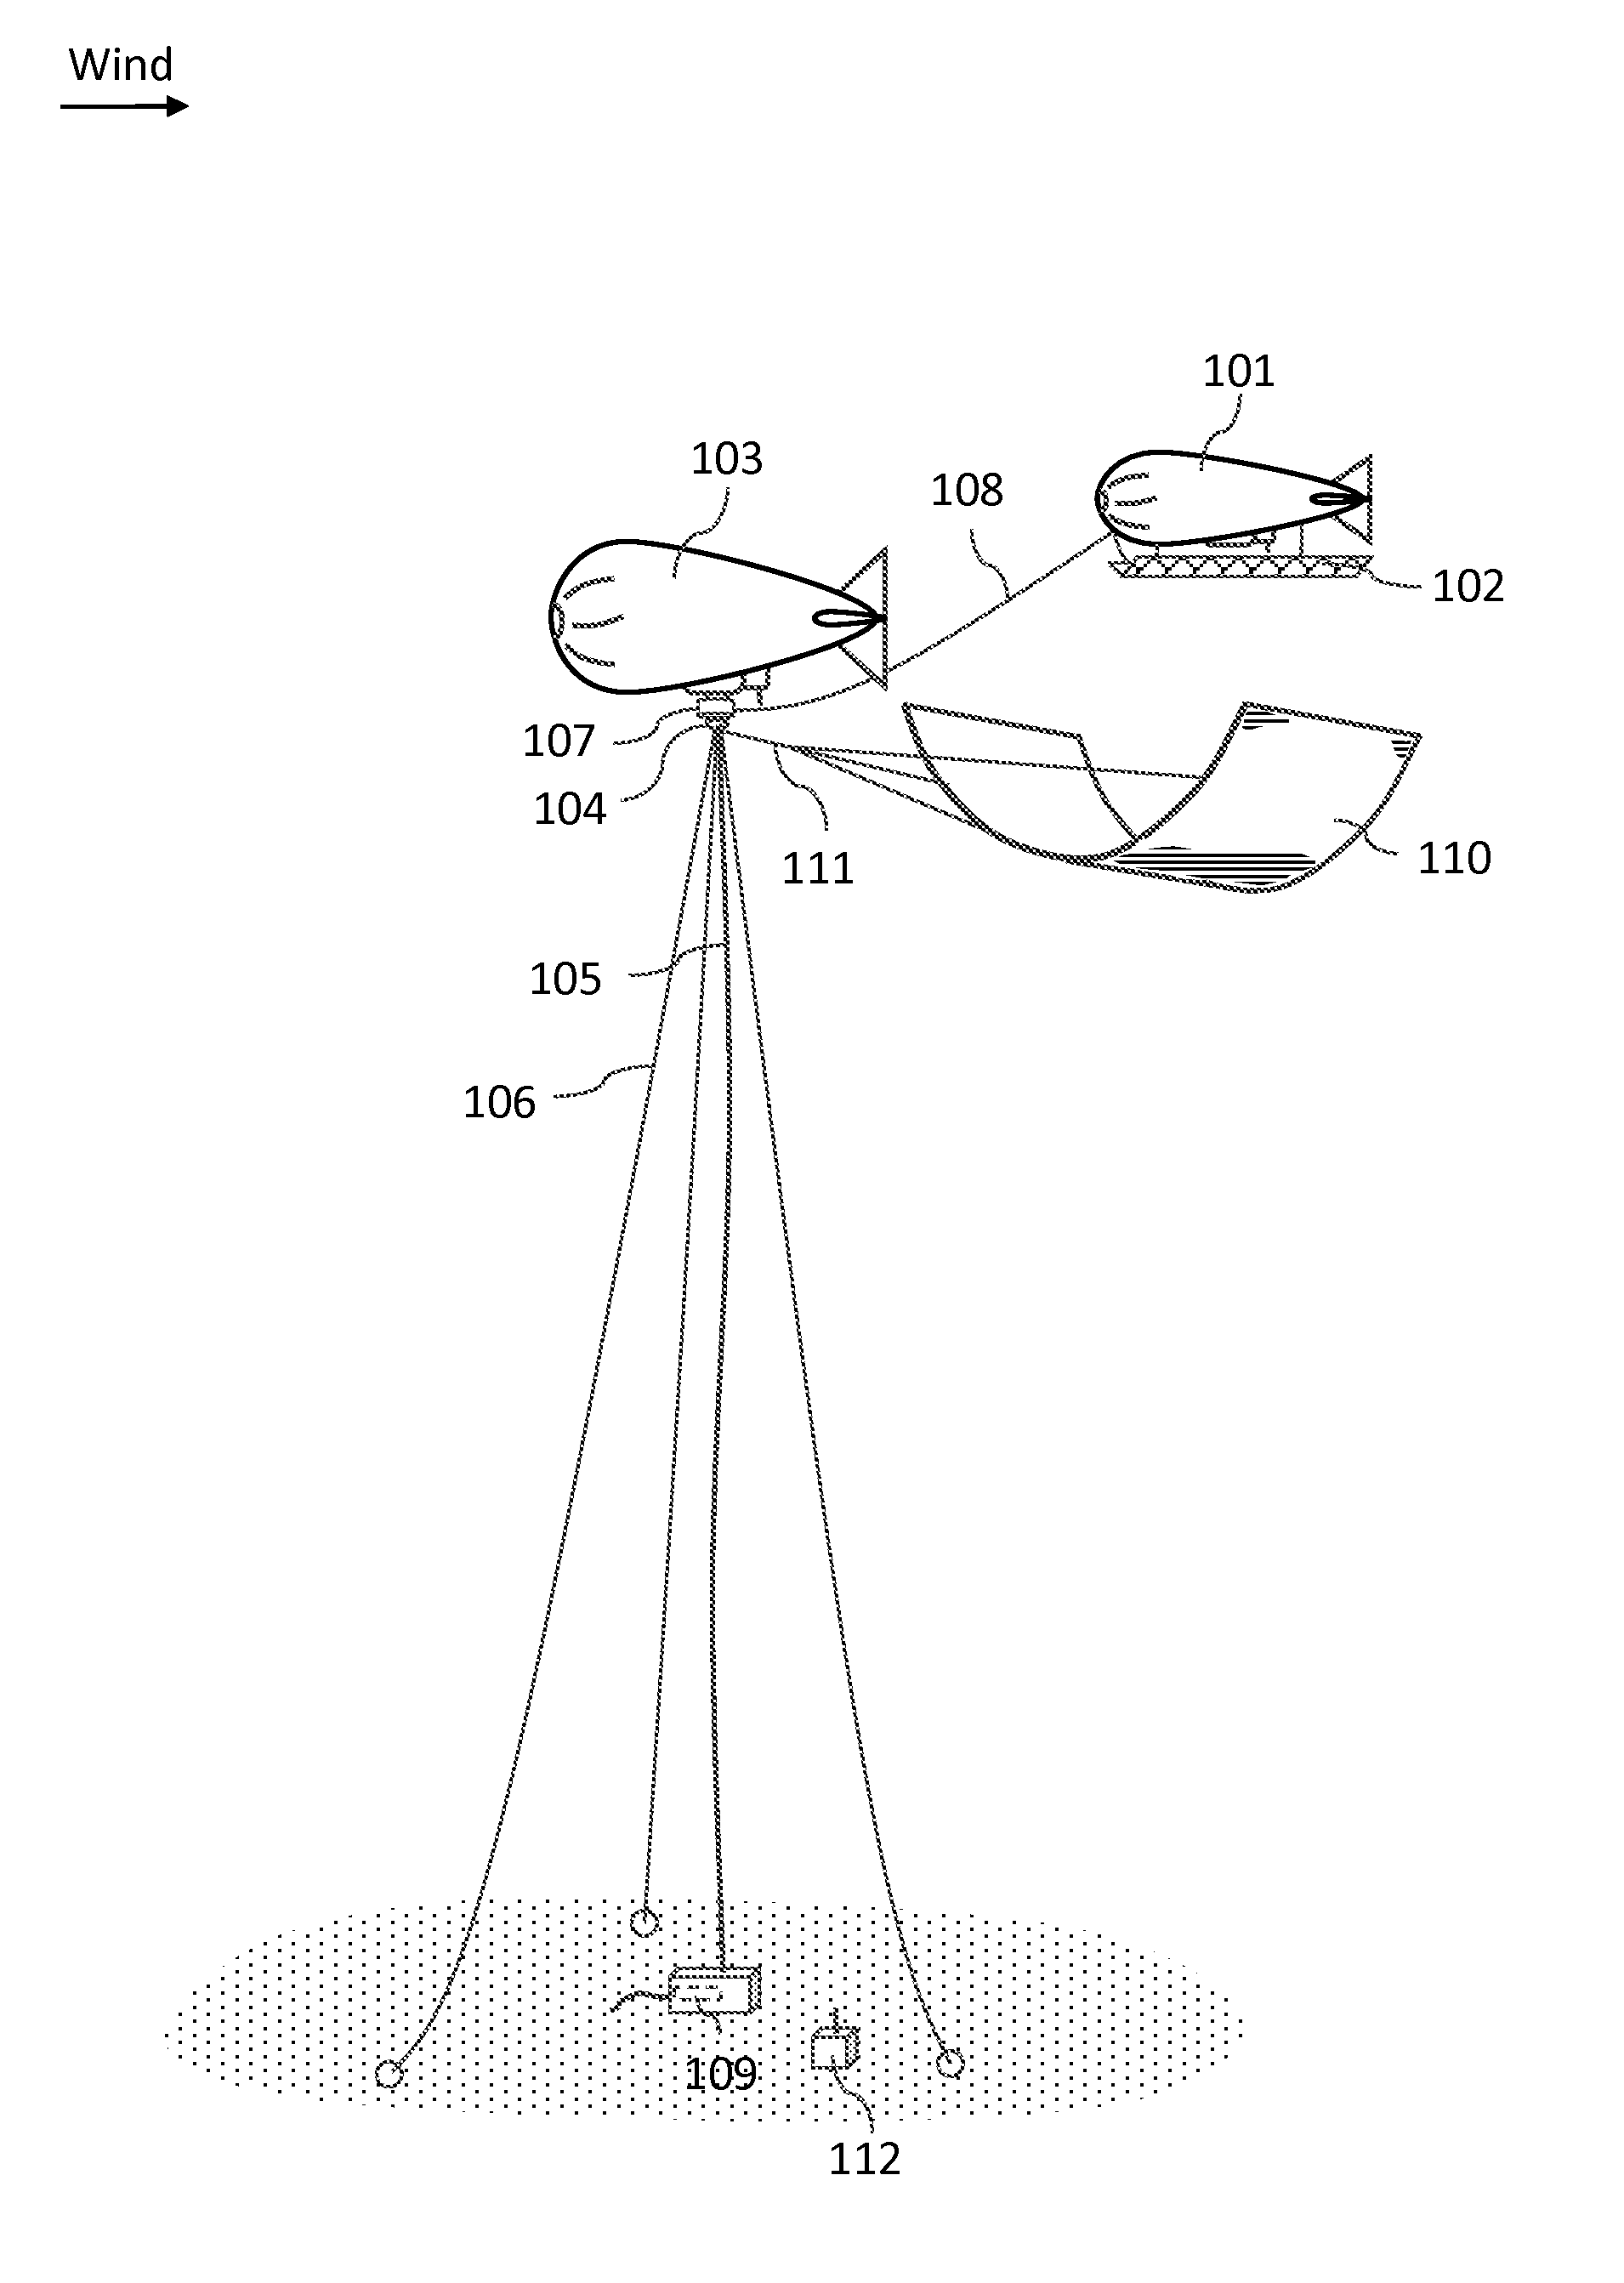 Airborne photovoltaic solar device and method